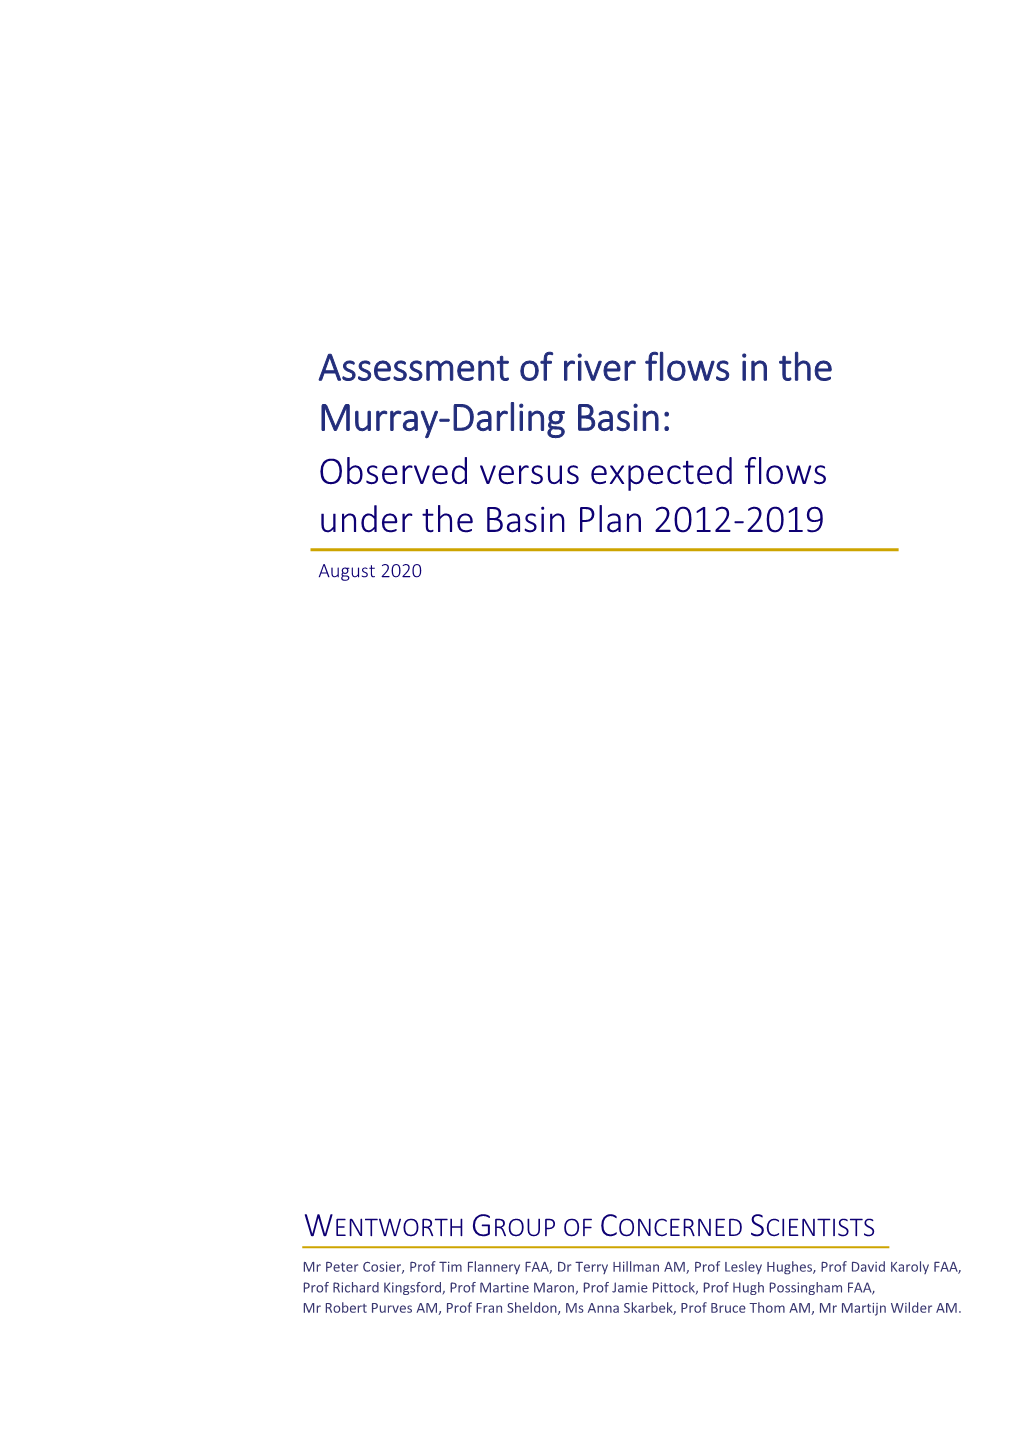 Assessment of River Flows in the Murray-Darling Basin: Observed Versus Expected Flows Under the Basin Plan 2012-2019